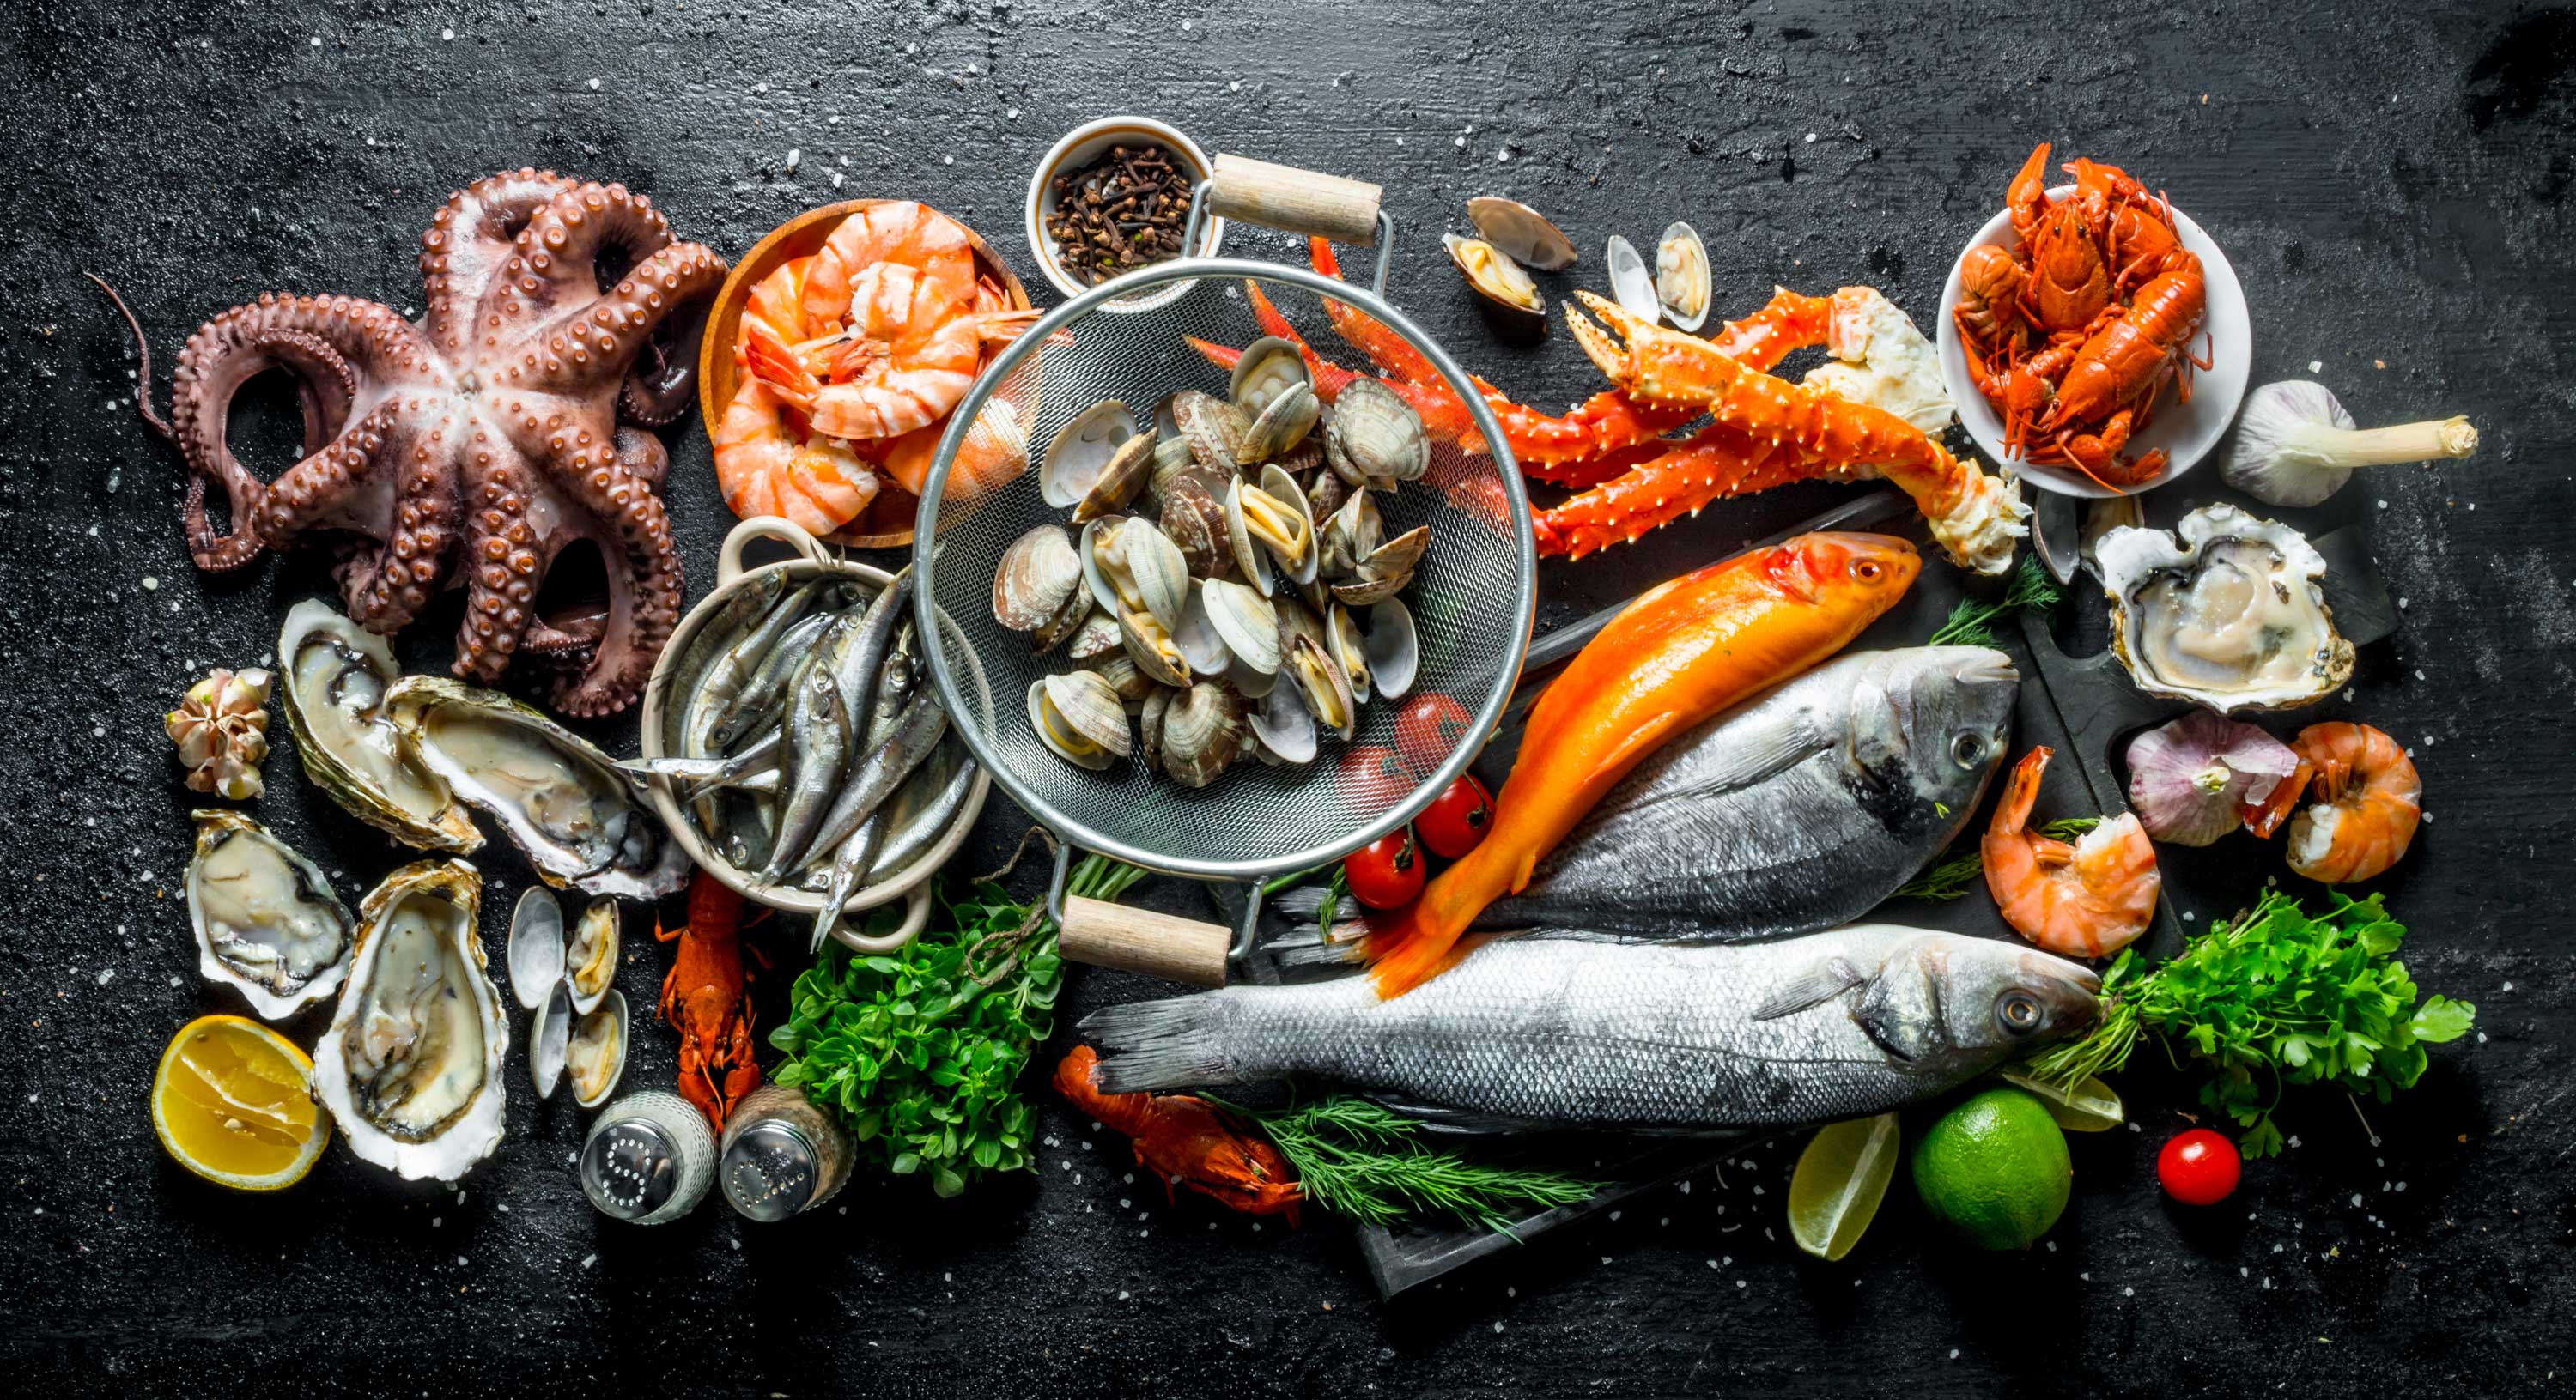 An assortment of seafood, ready to cook.